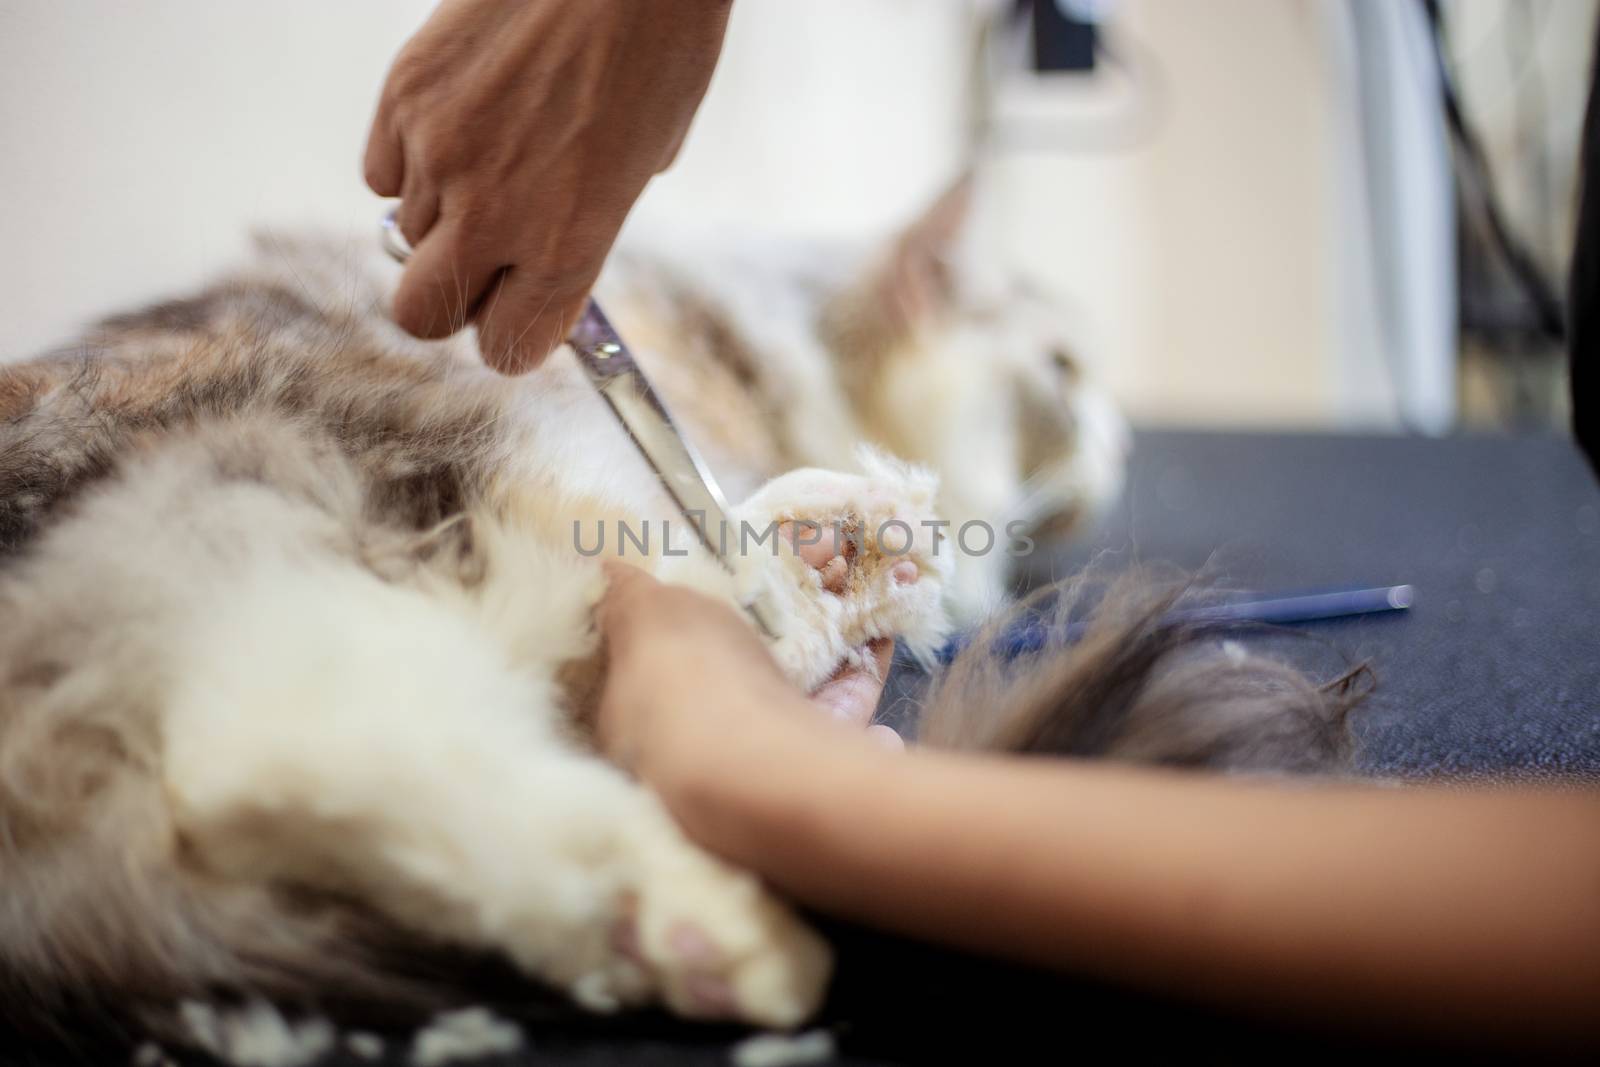 Woman are cutting hair of foot and cleaning a cat.